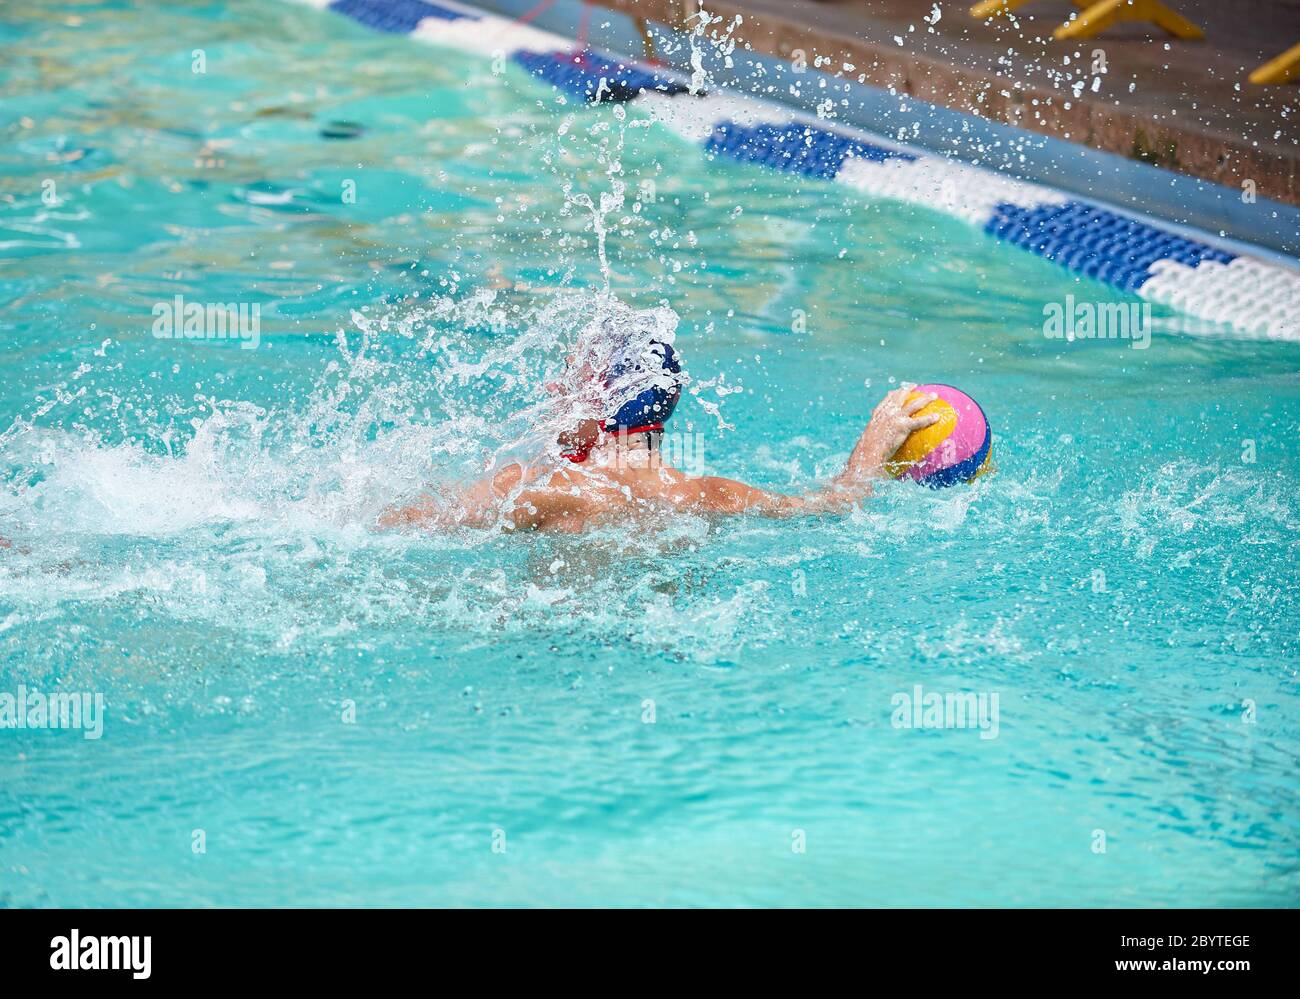 Water polo player in a swimming pool getting splashed with water ready to throw a ball Stock Photo